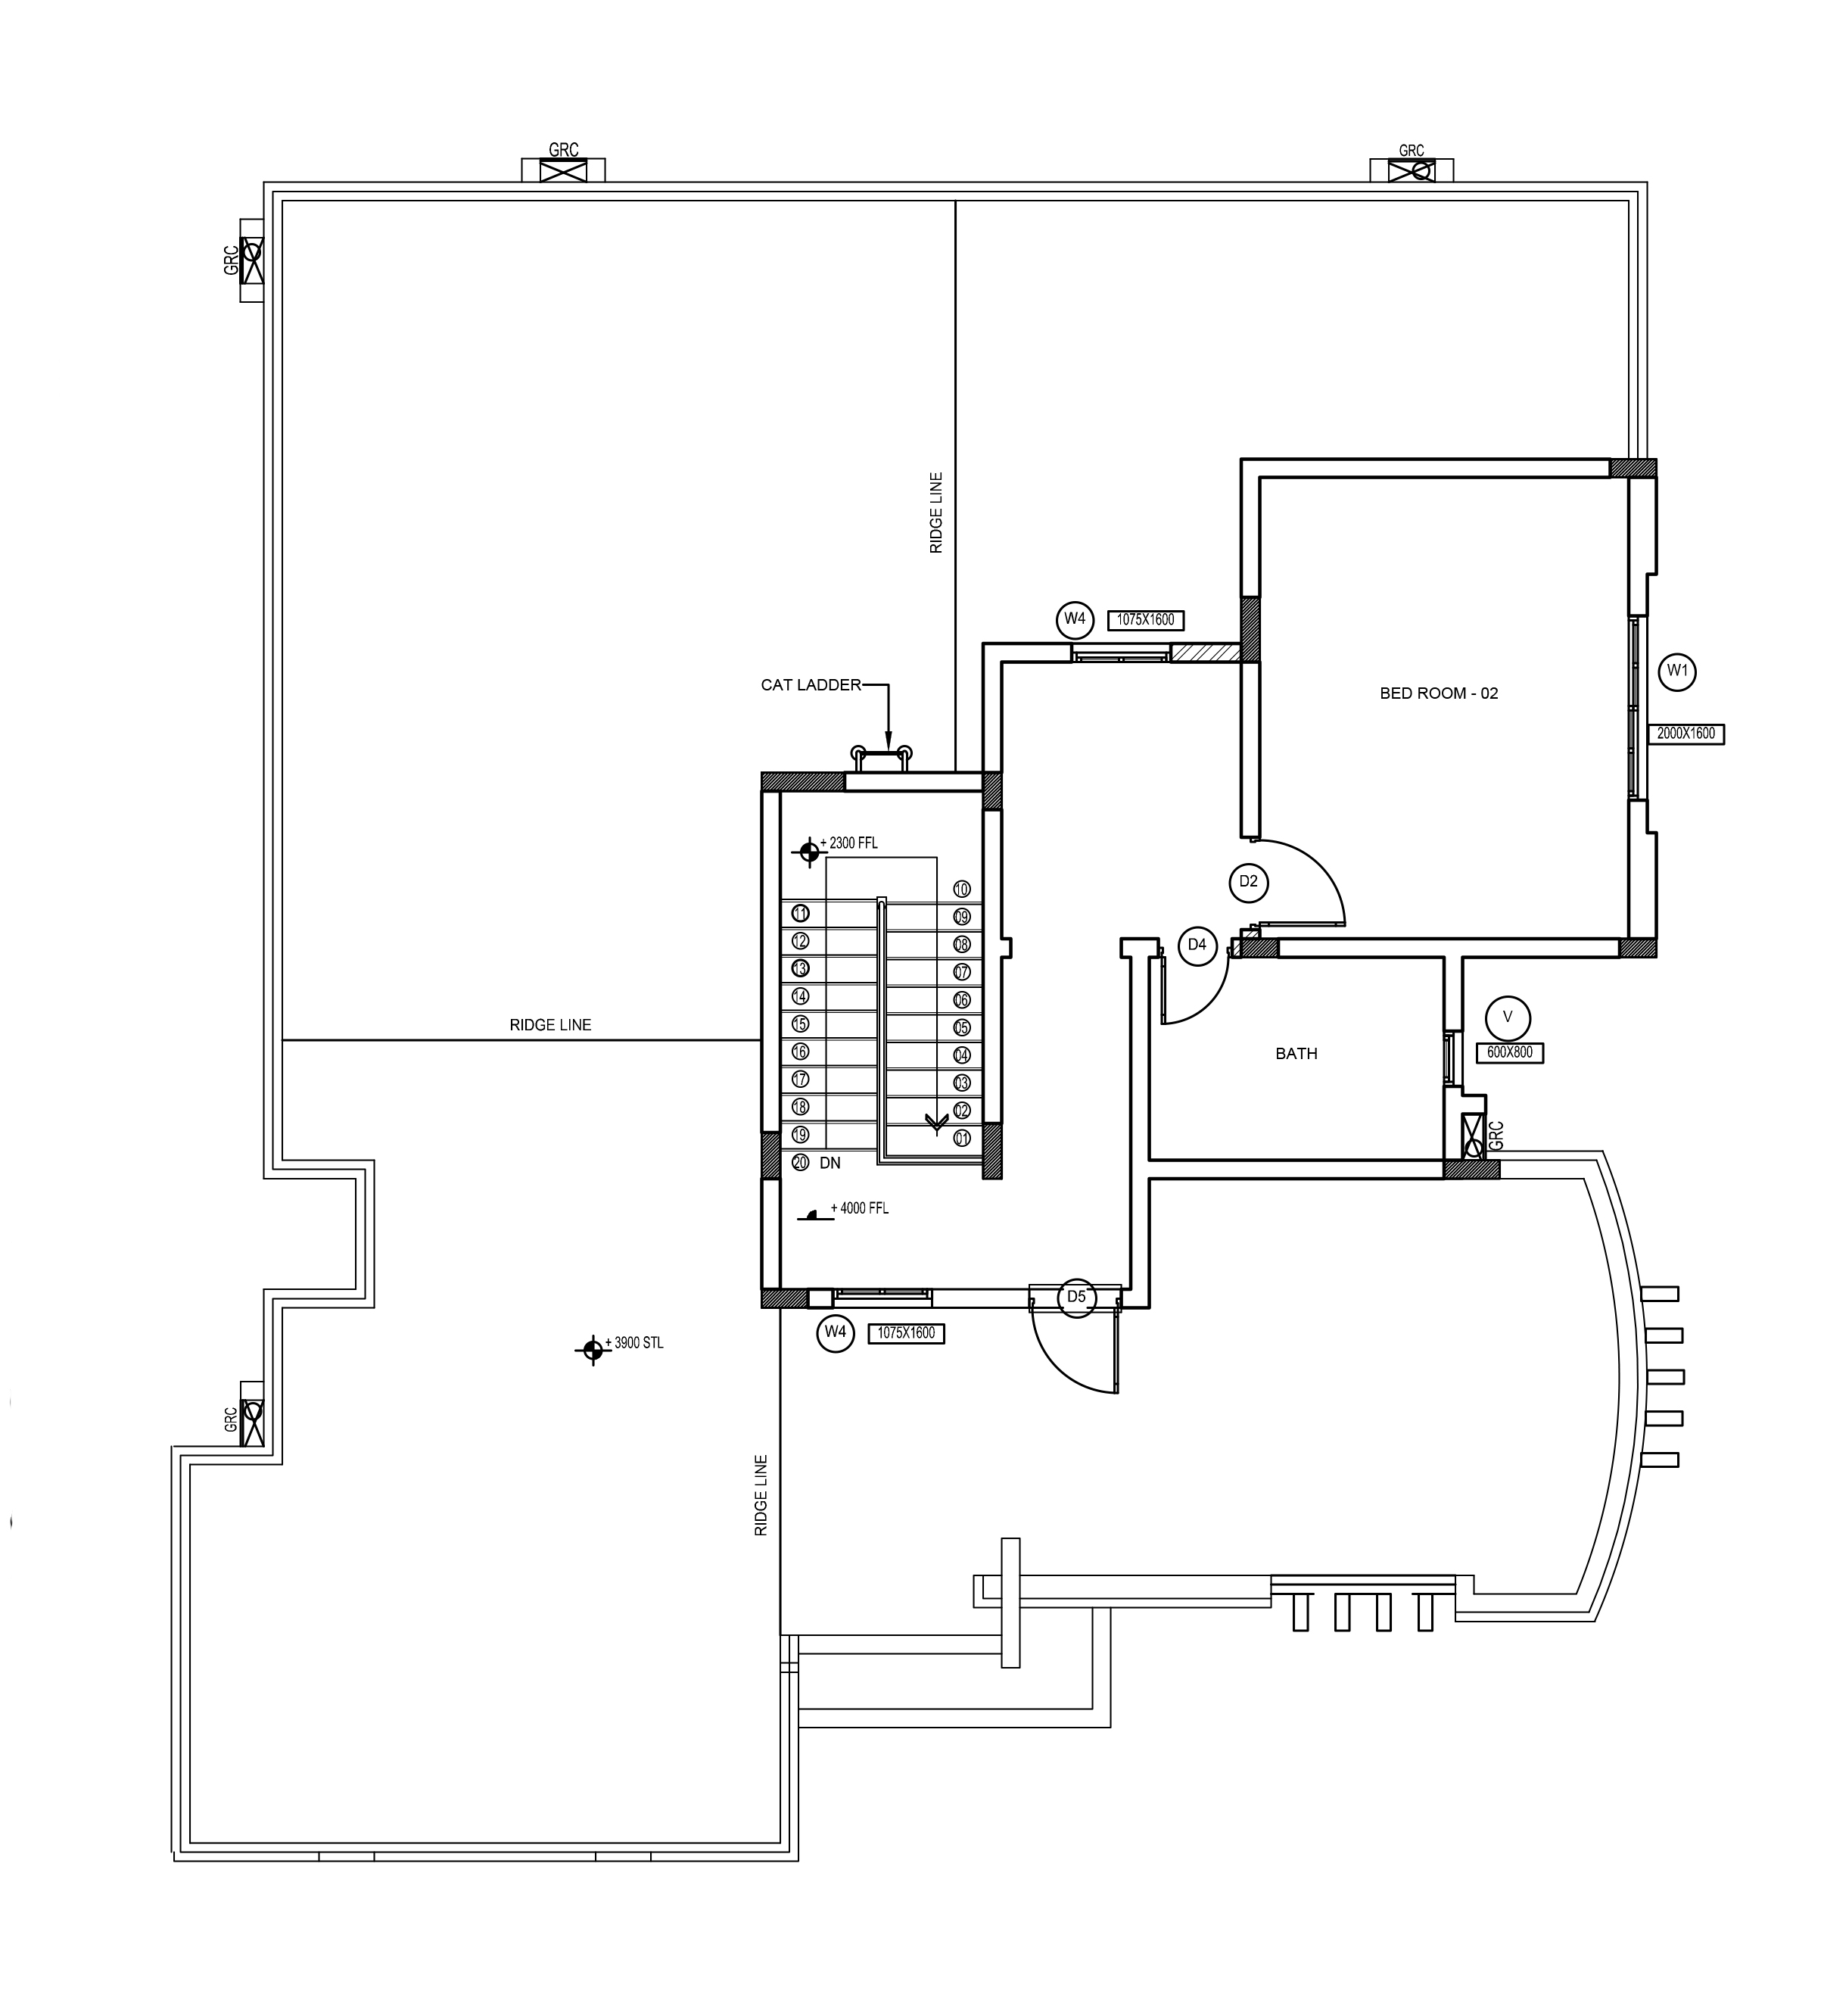 Four bedroom double story house plan for middle east country